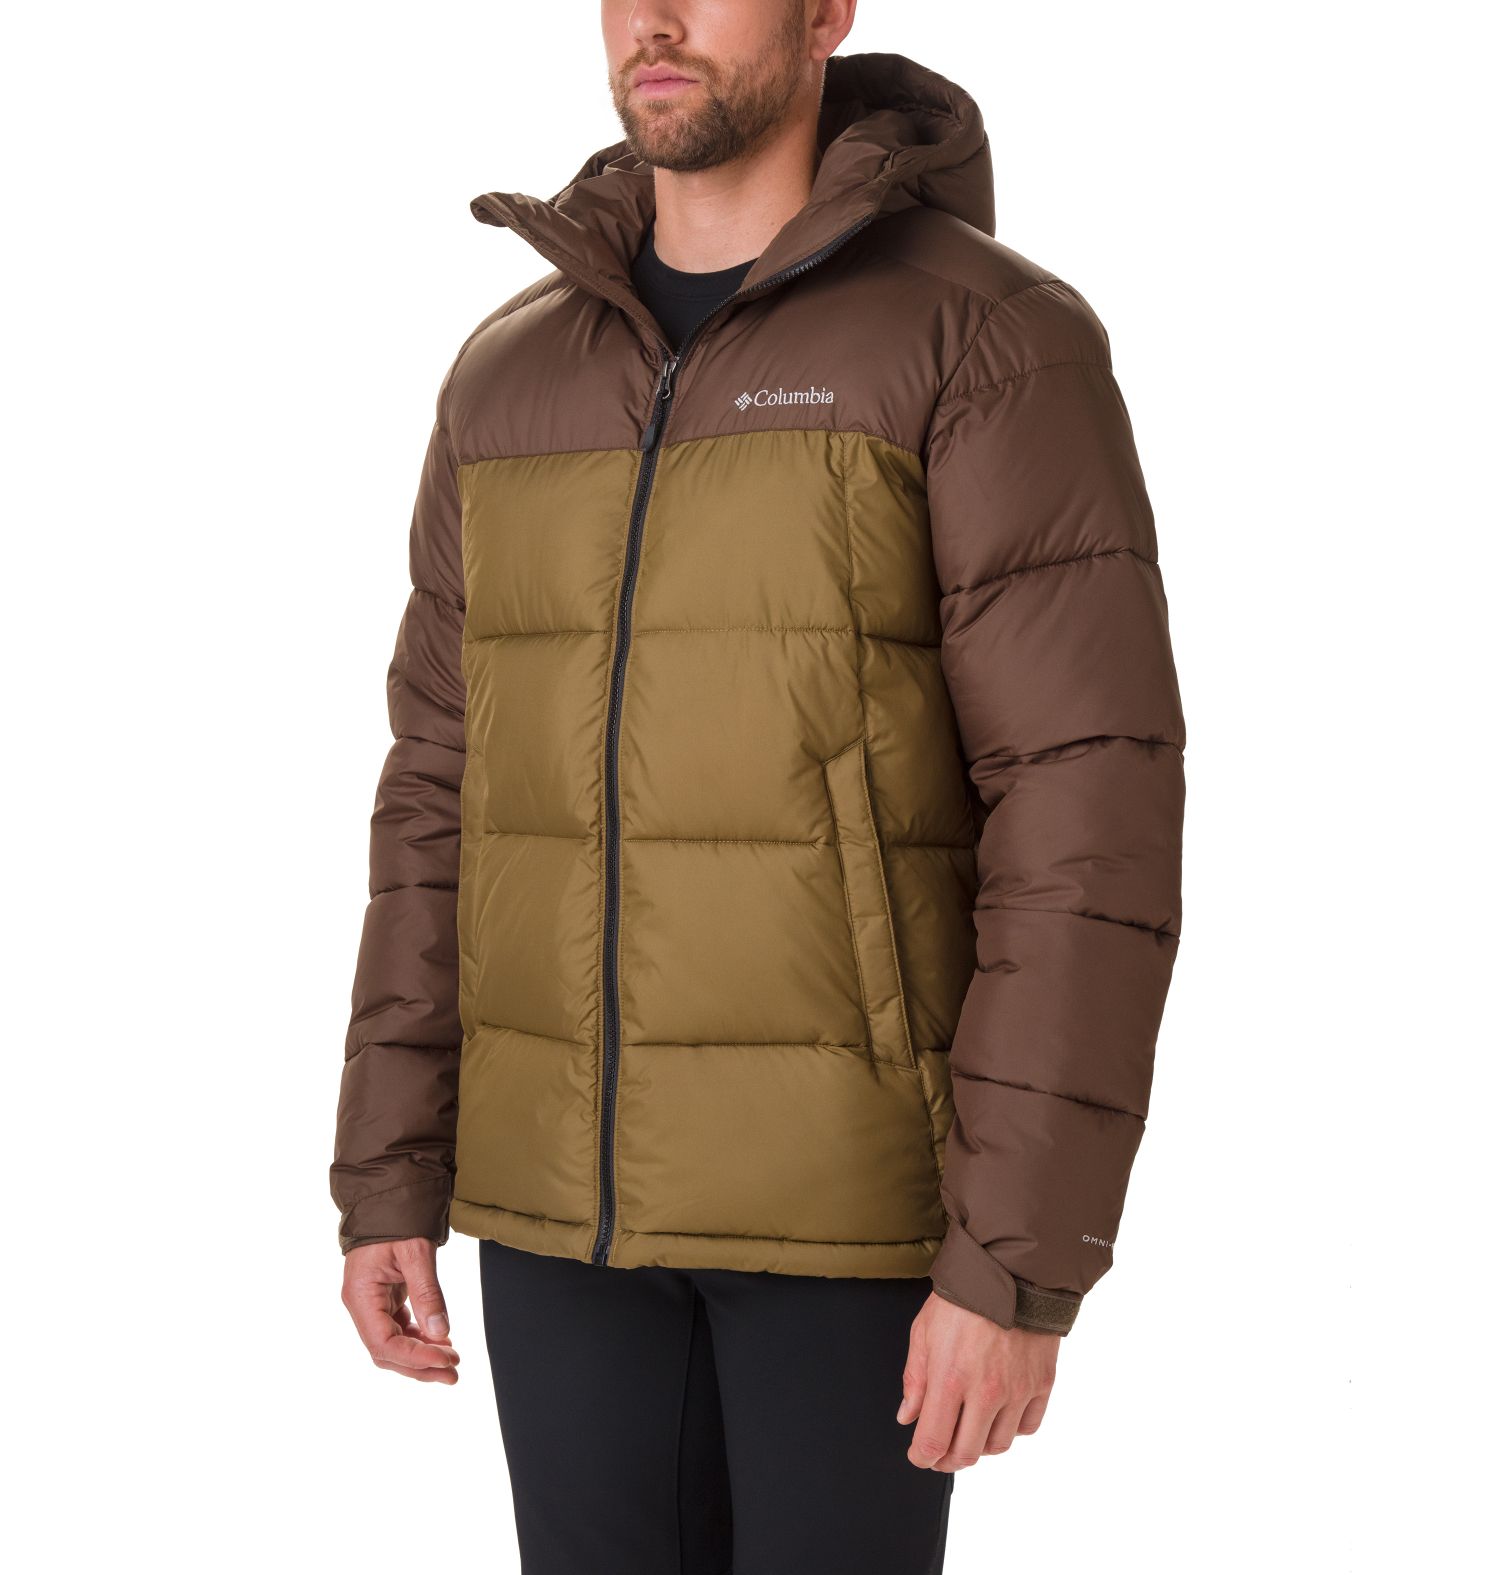 CAZADORA PIKE LAKE HOODED STORM-LITE DP II 100% POLYESTER Omni.HEAT THERMAL REFLECTIVE THERMARATOR WATER RESISTANT OLIVE BROWN/OLIVE GREEN